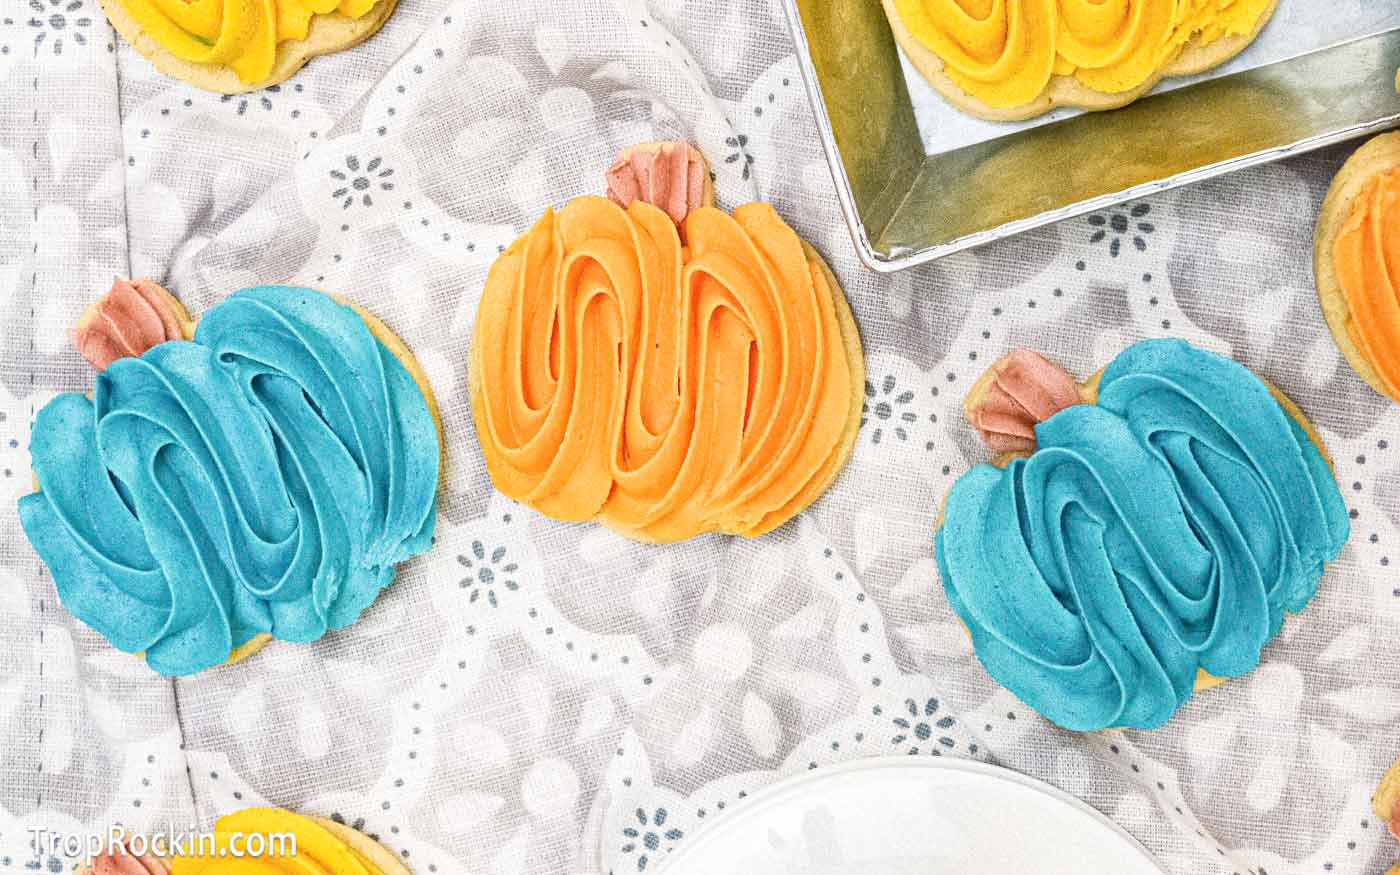 Three pumpkin spice cookies cutout in the shape of pumpkins decorated with a light blue buttercream frosting and one decorated with orange buttercream frosting.